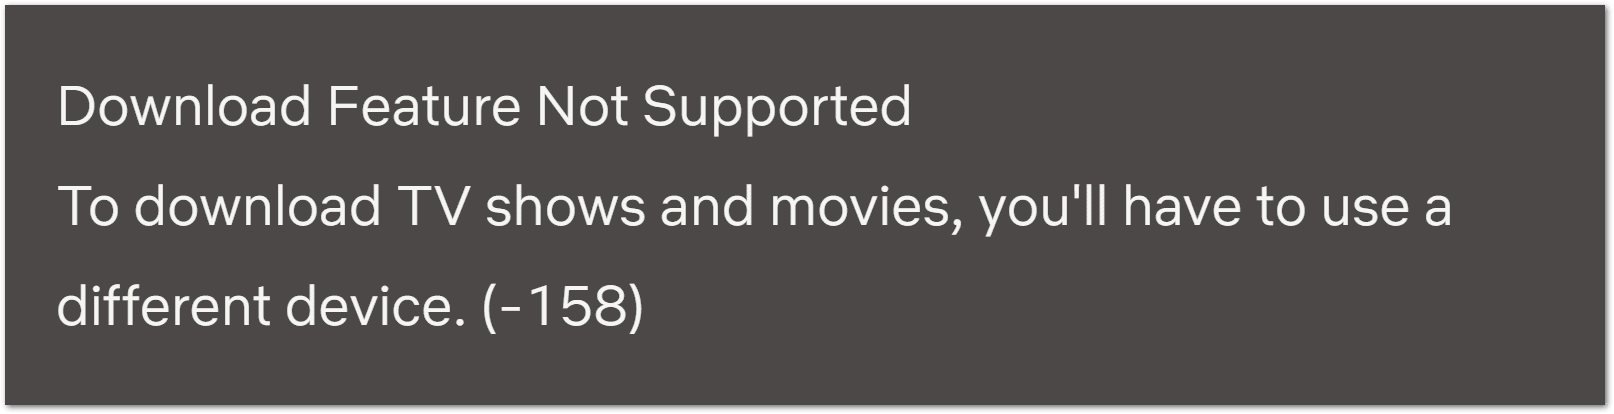 Netflix download feature not supported error message